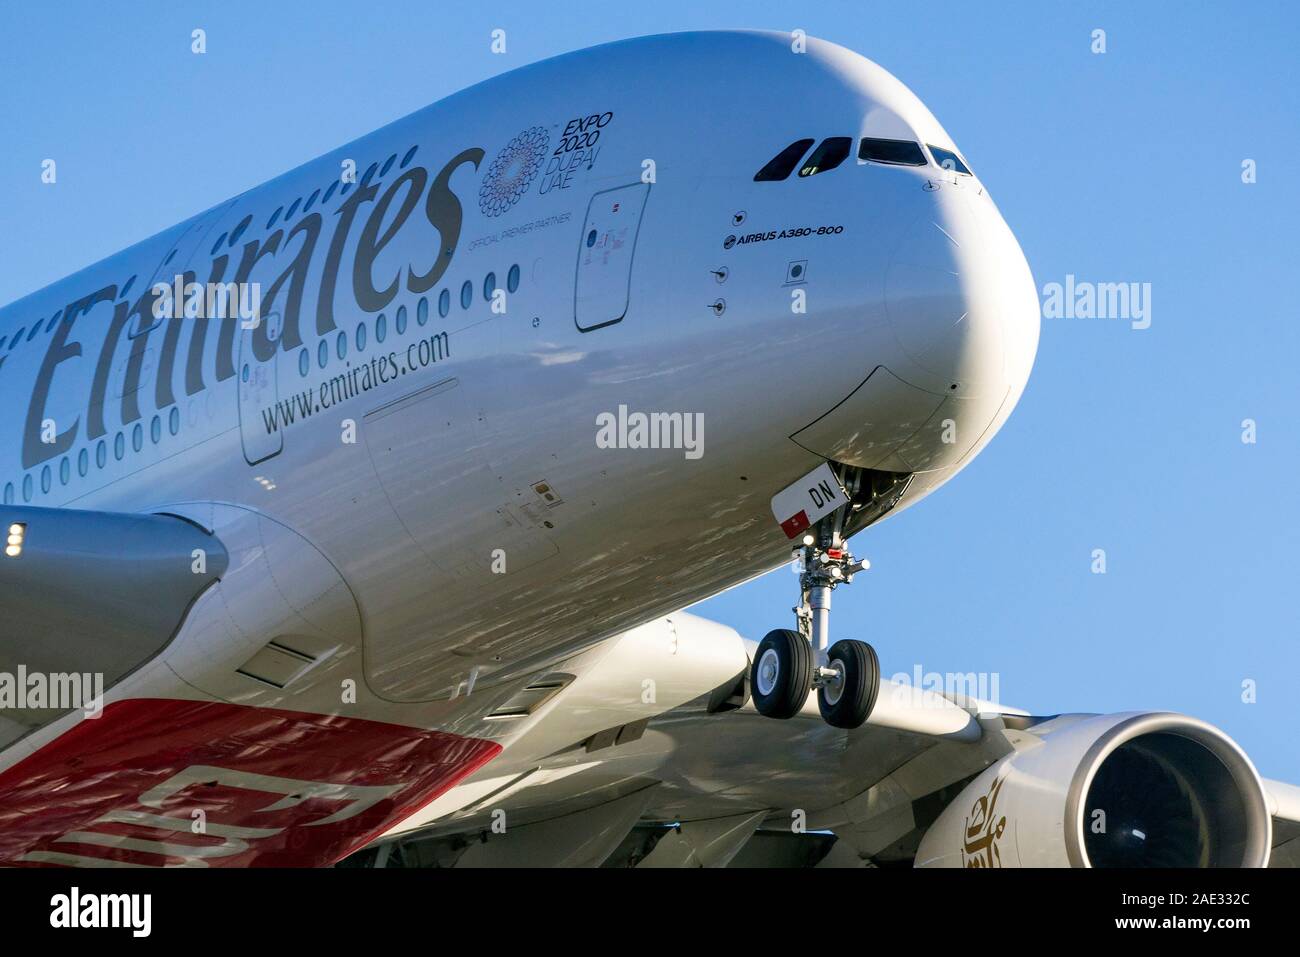 Airbus A380-800 landing. Emirates airline. Stock Photo